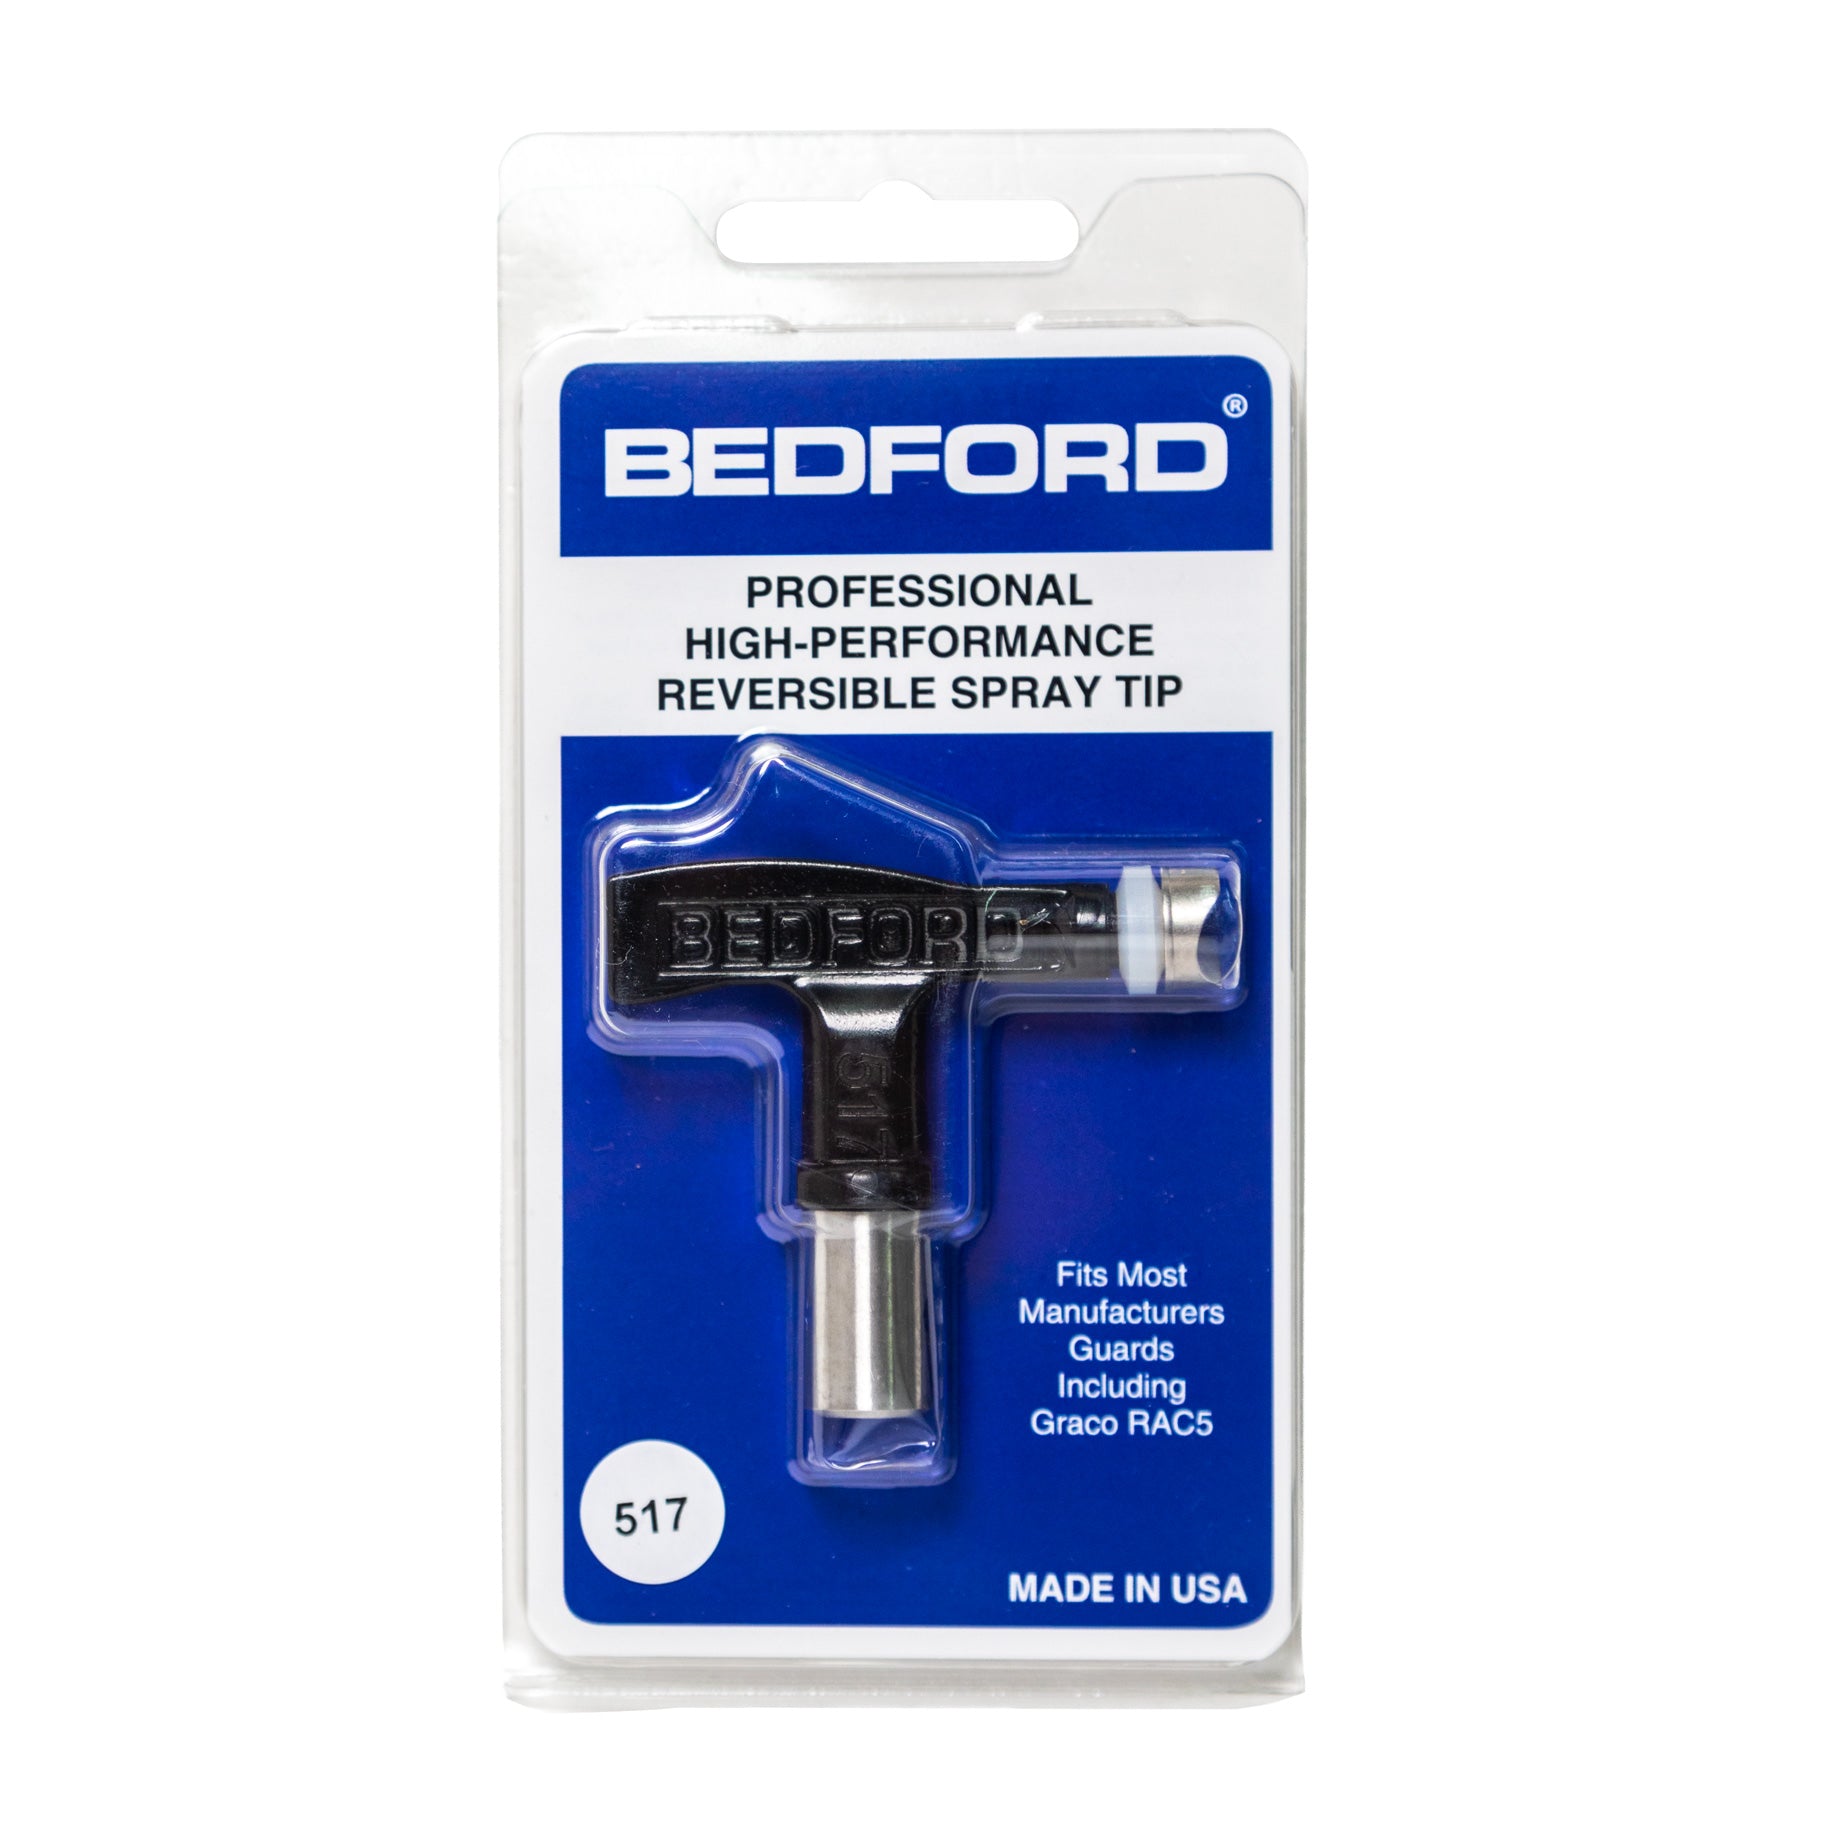 Bedford Airless Spray Tips